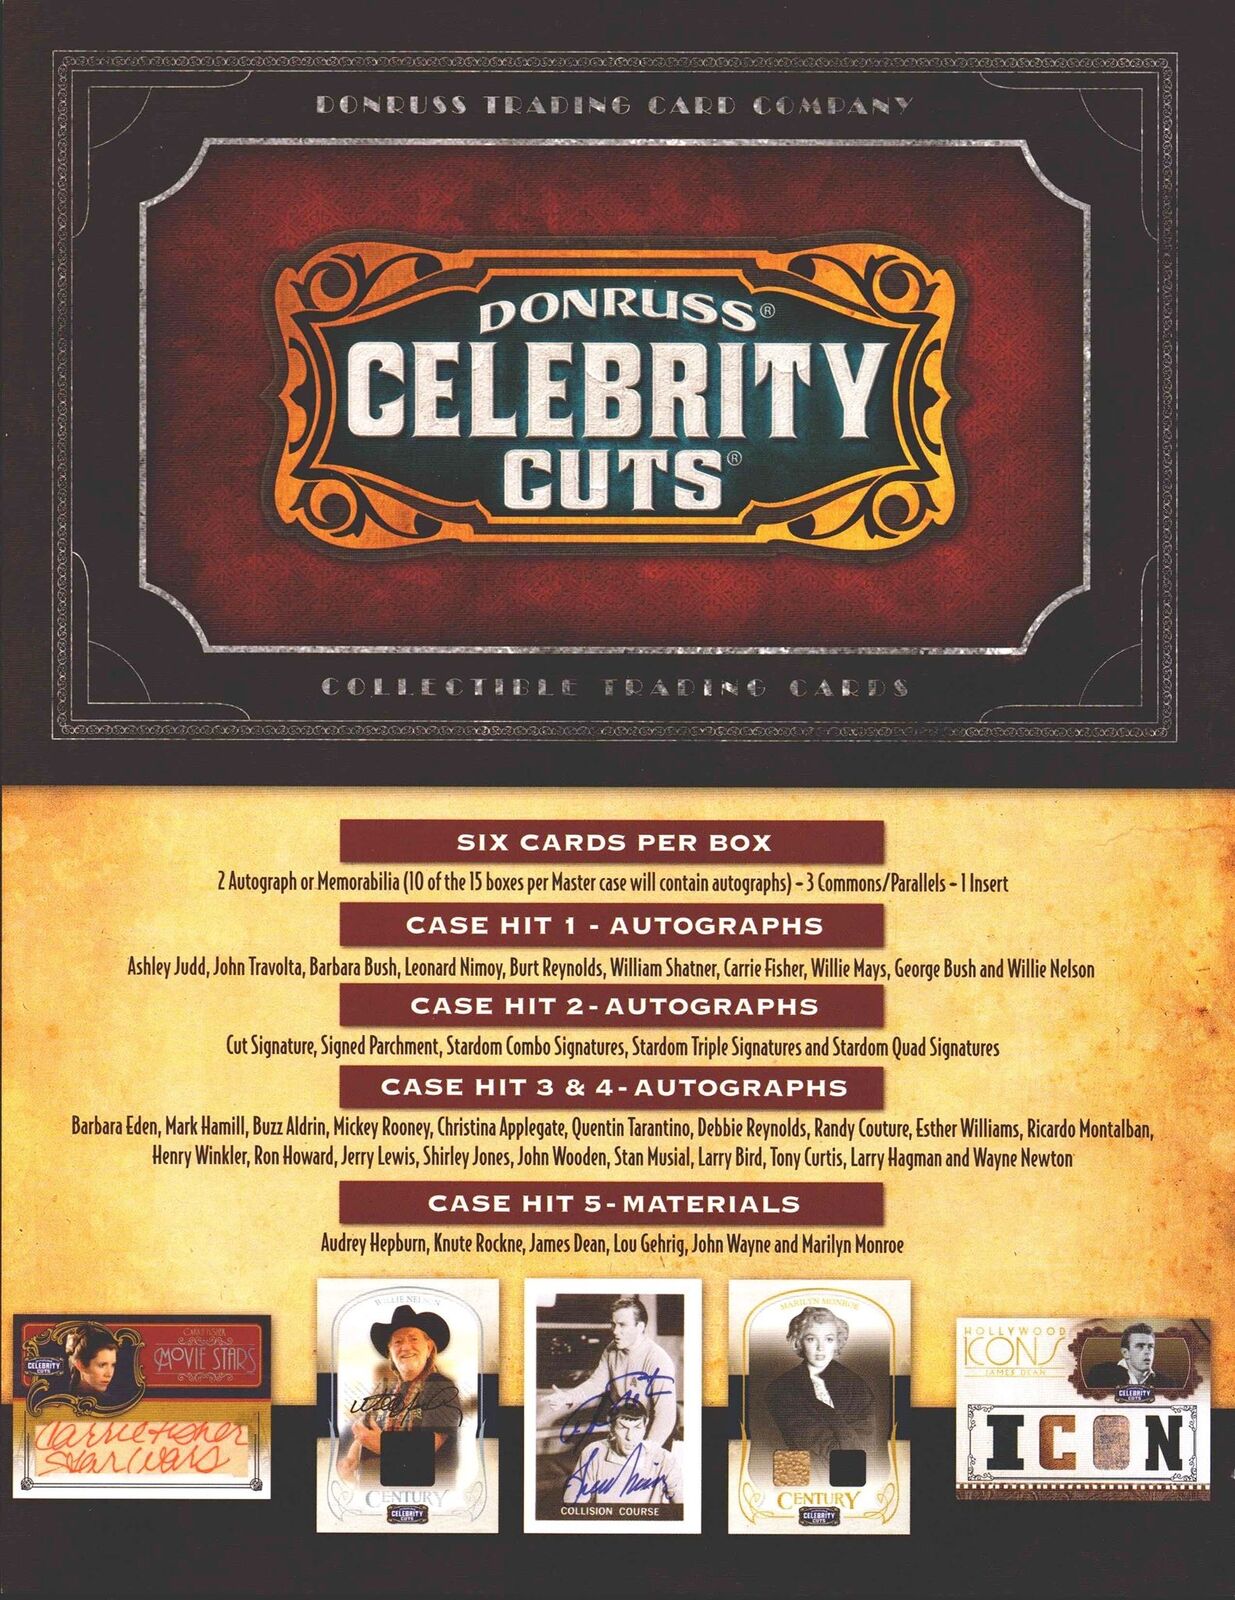 Americana Celebrity Cuts Trading Card Dealer Sell Sheet Promotional Sale 2008